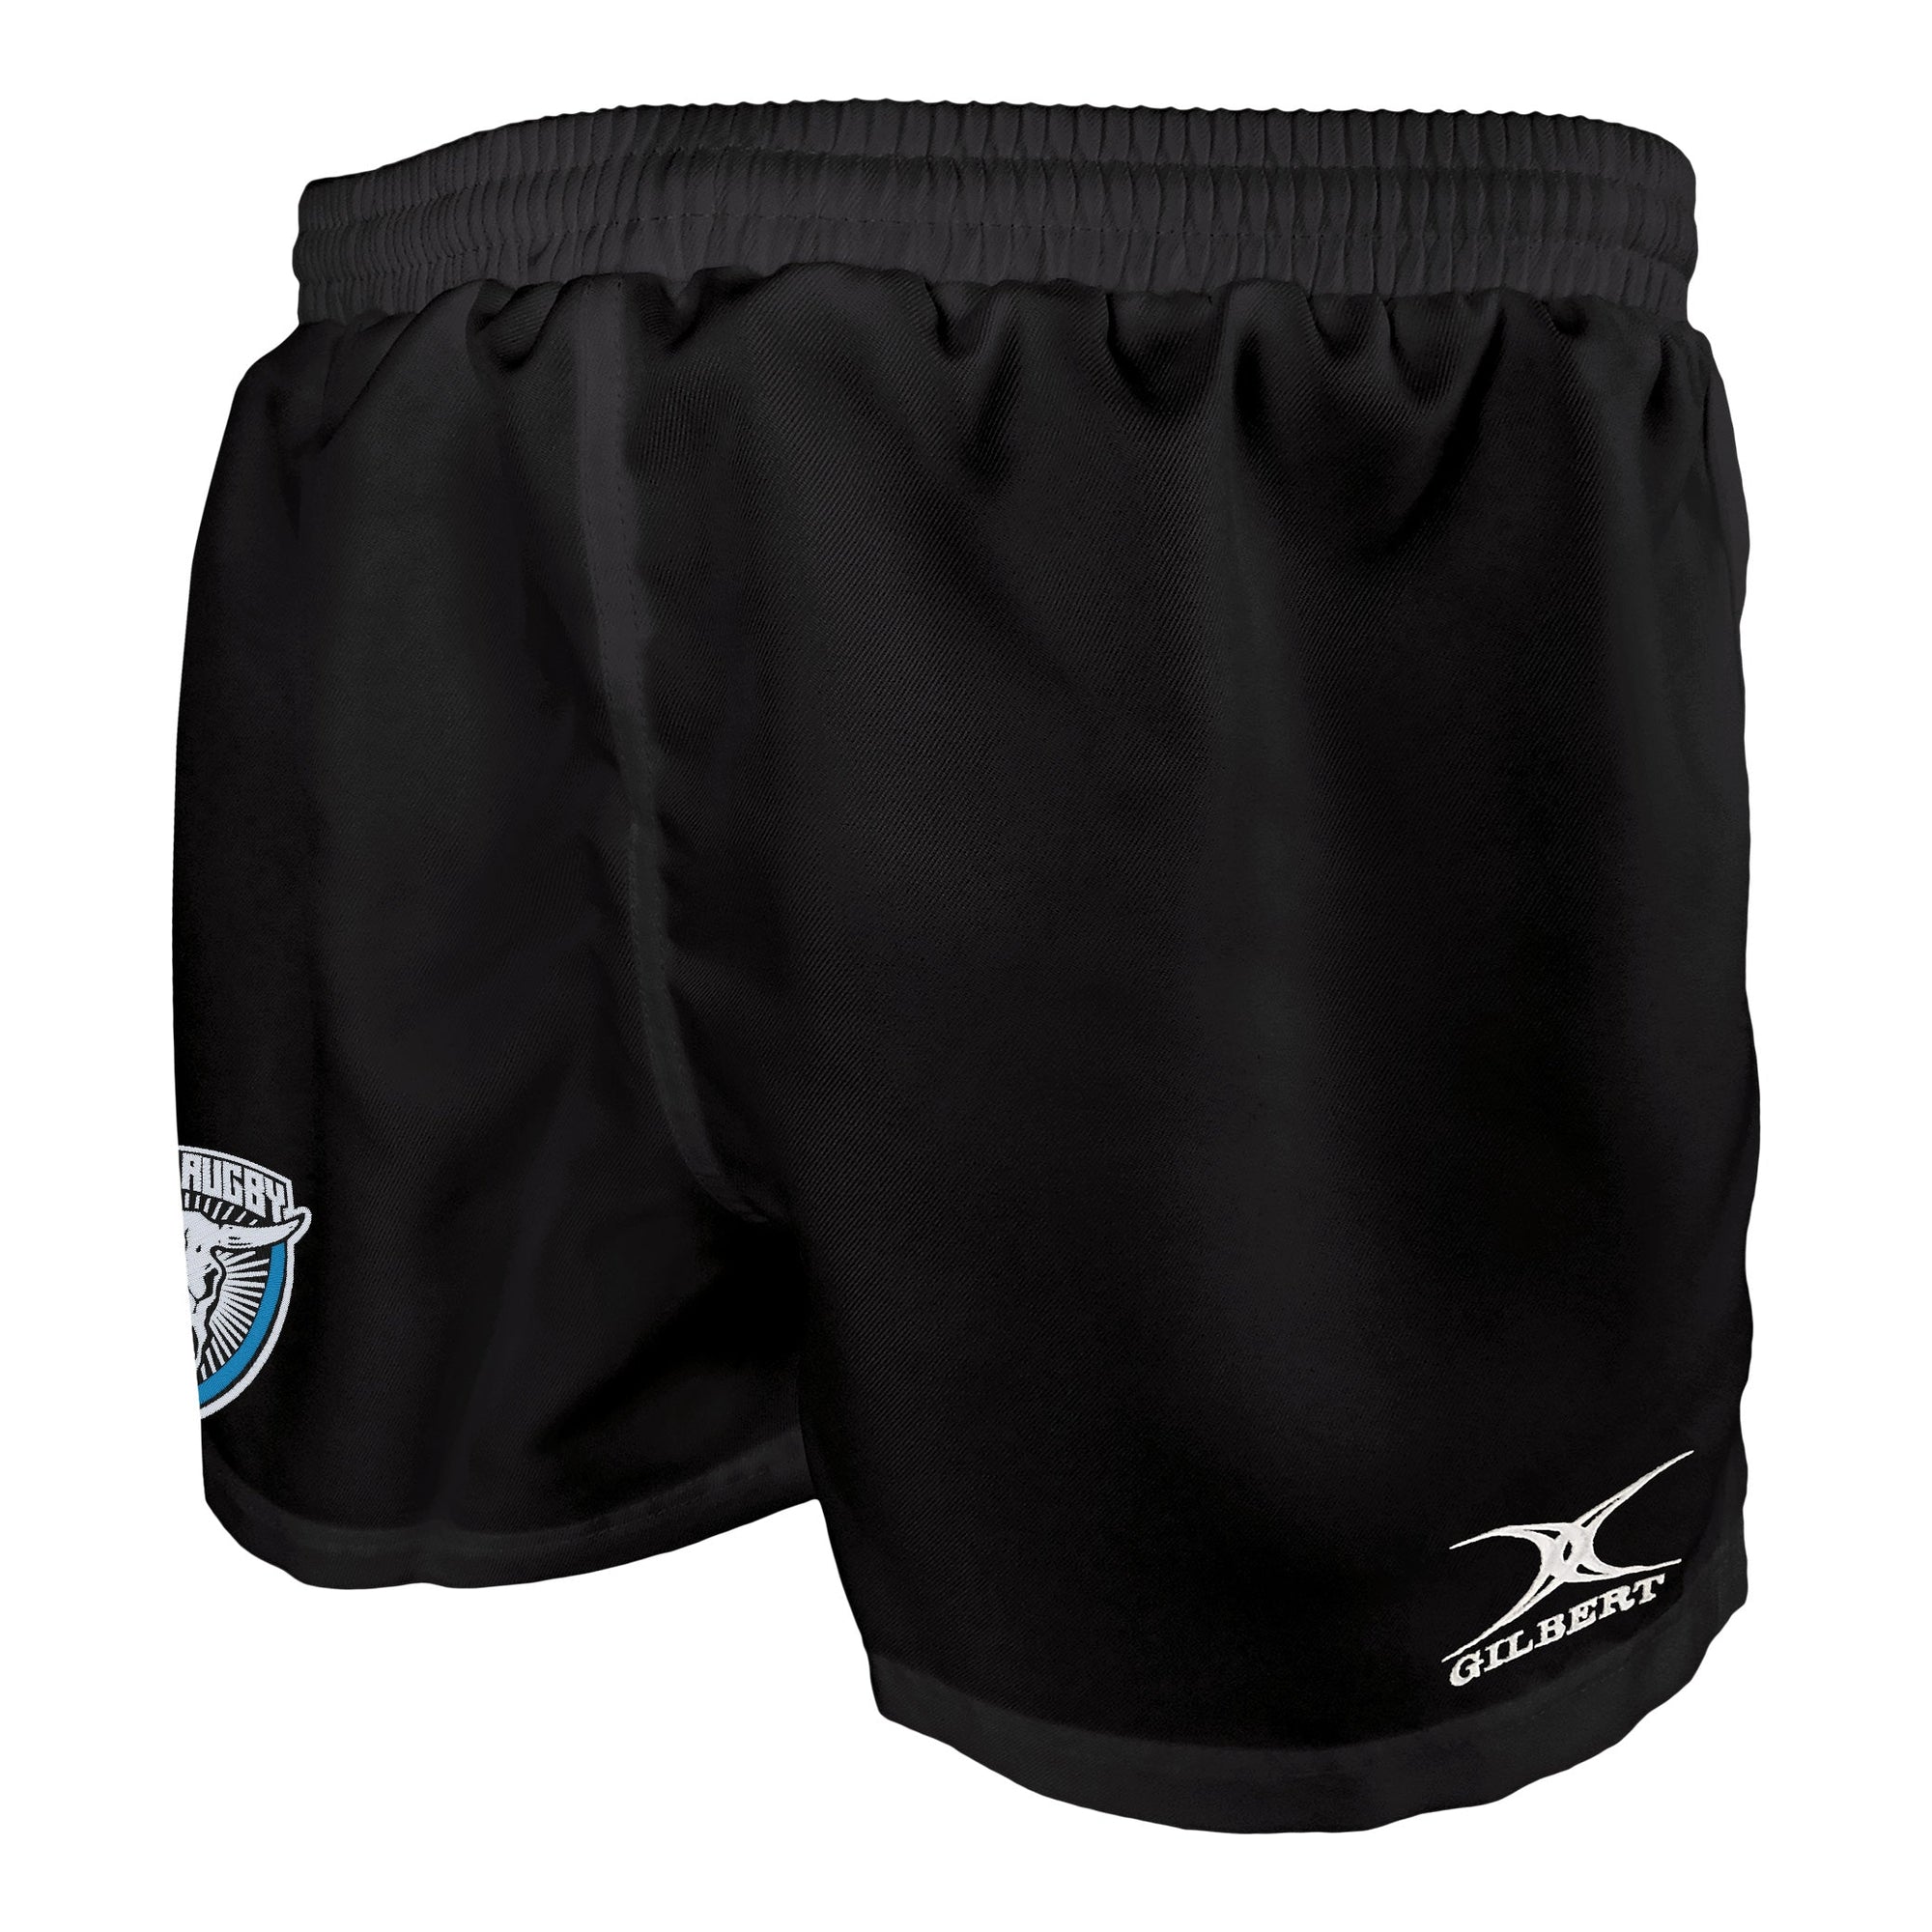 Rugby Imports Bend Rugby  Saracen Rugby Shorts